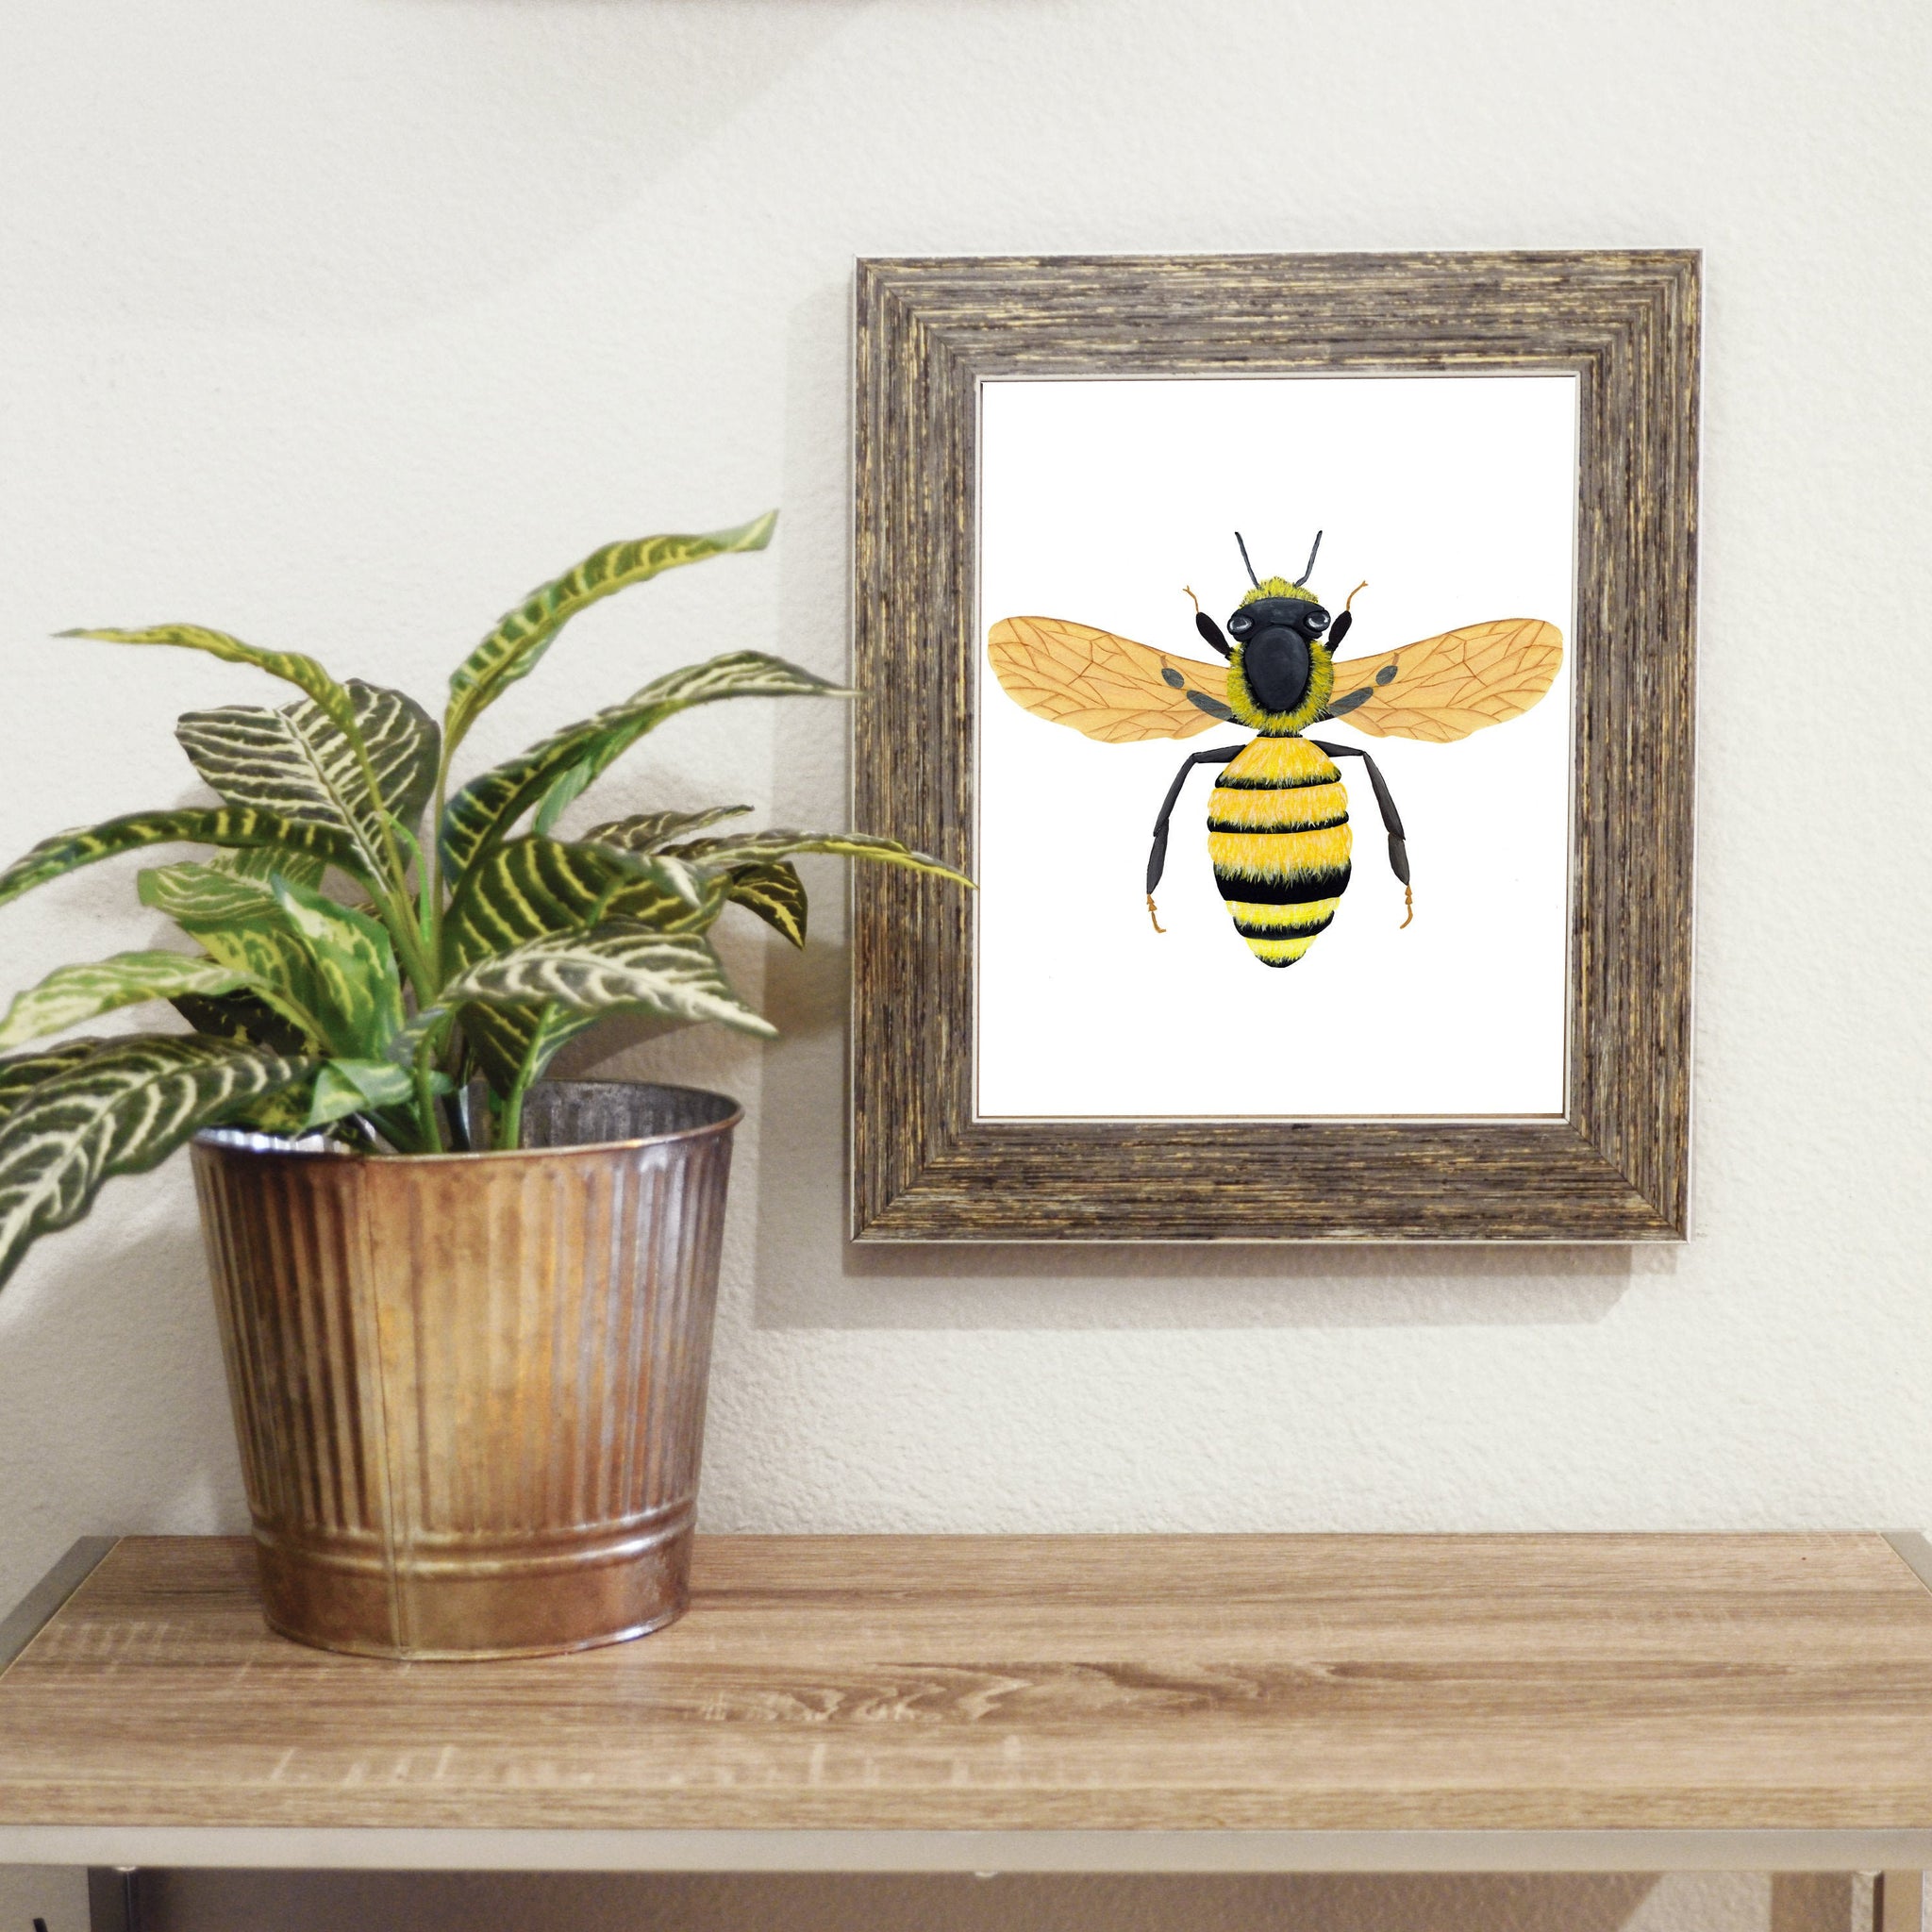 print reproduction of hand painted honey bee illustration